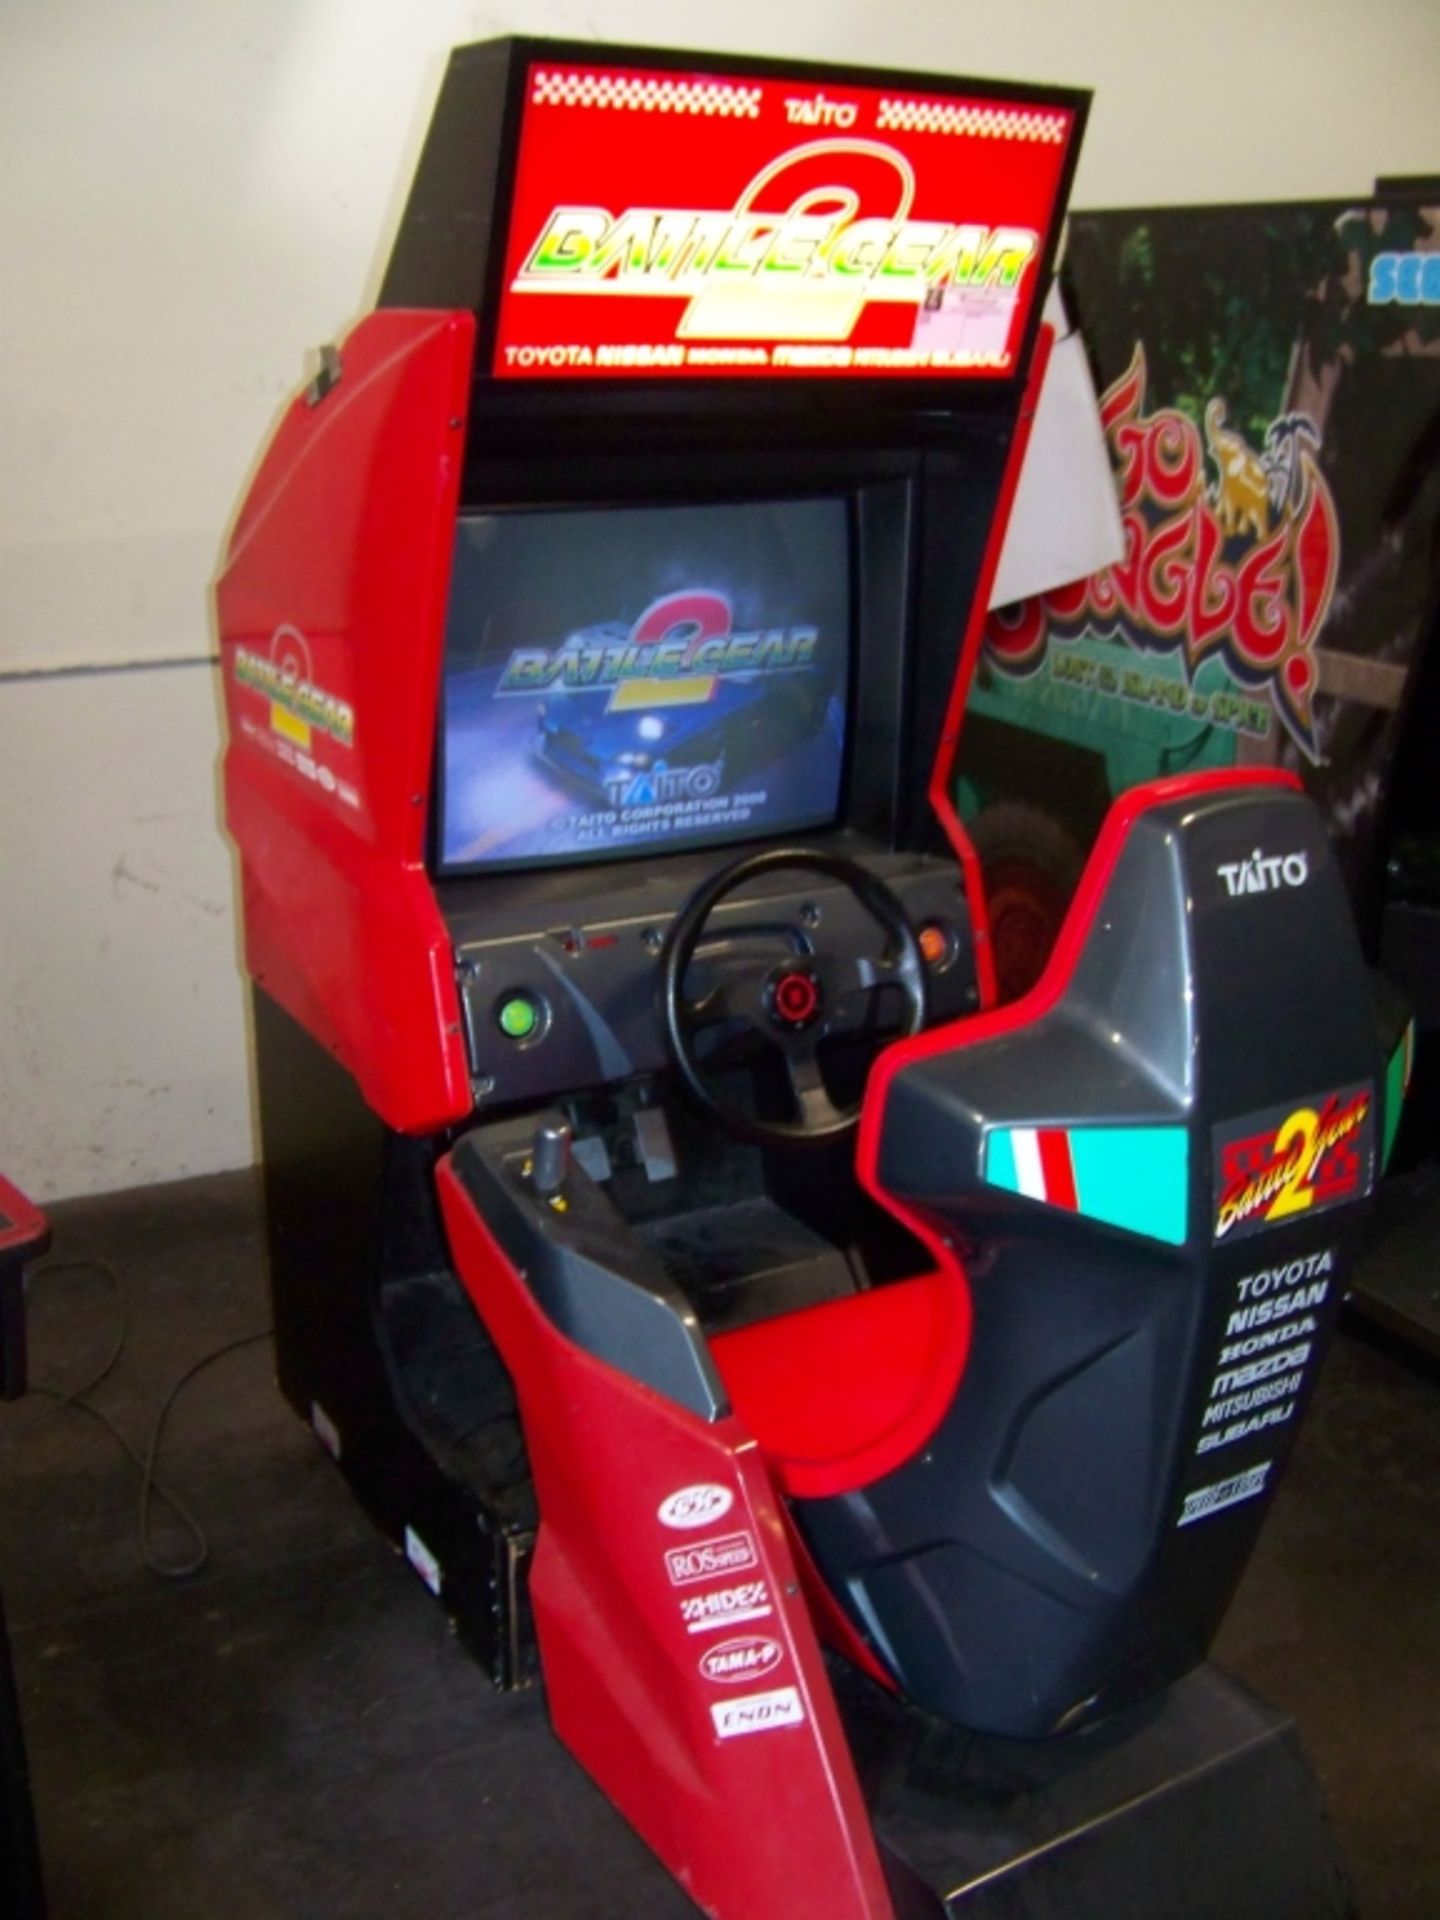 BATTLE GEAR 2 SINGLE SEAT RACING ARCADE GAME TAITO - Image 4 of 4